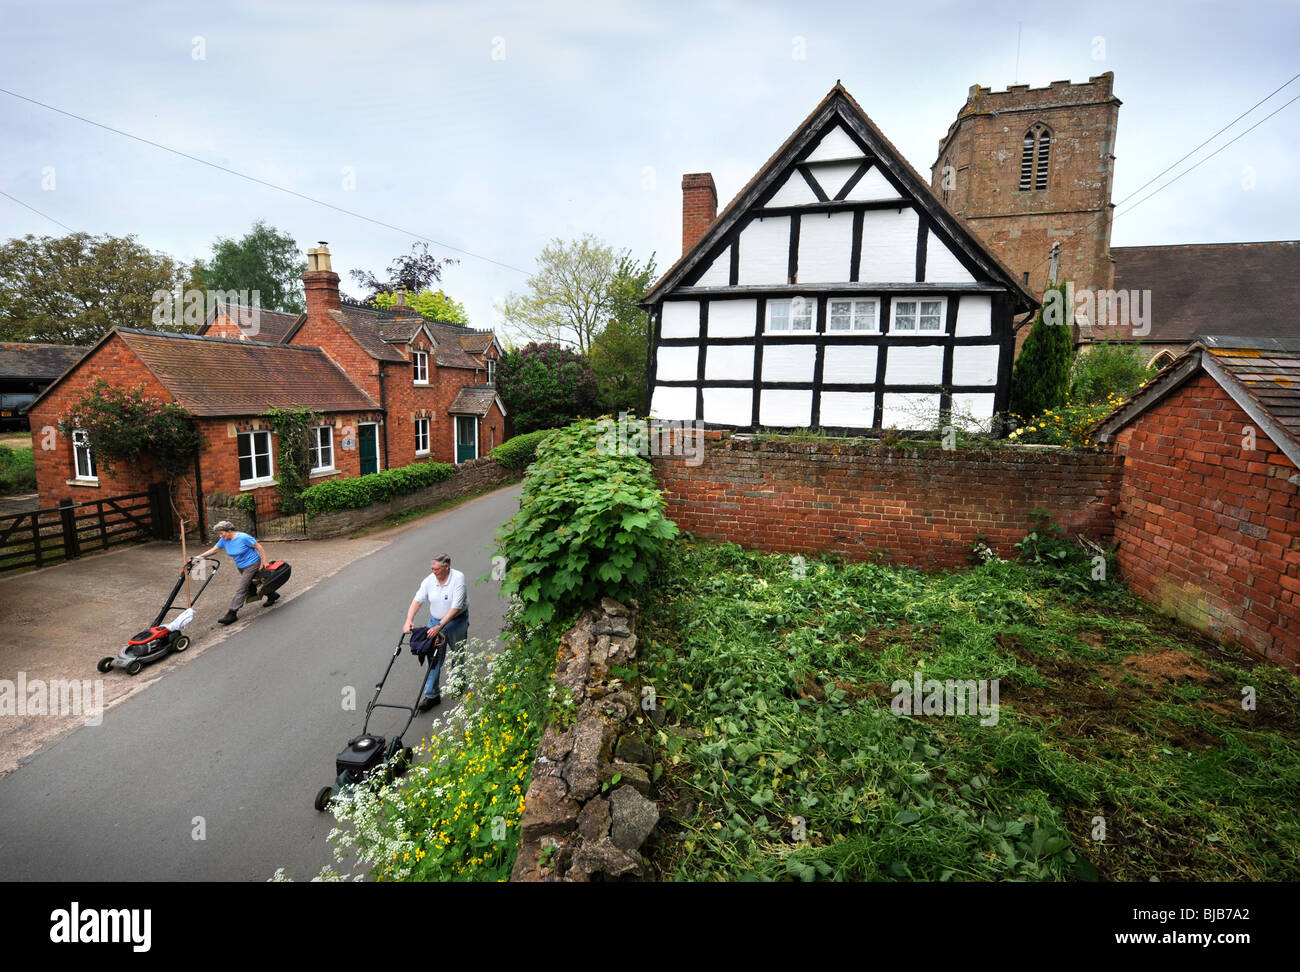 Gardeners push lawnmowers through the village of Redmarley D'Abitot, Gloucestershire with the Church of St Bartholomew's Stock Photo